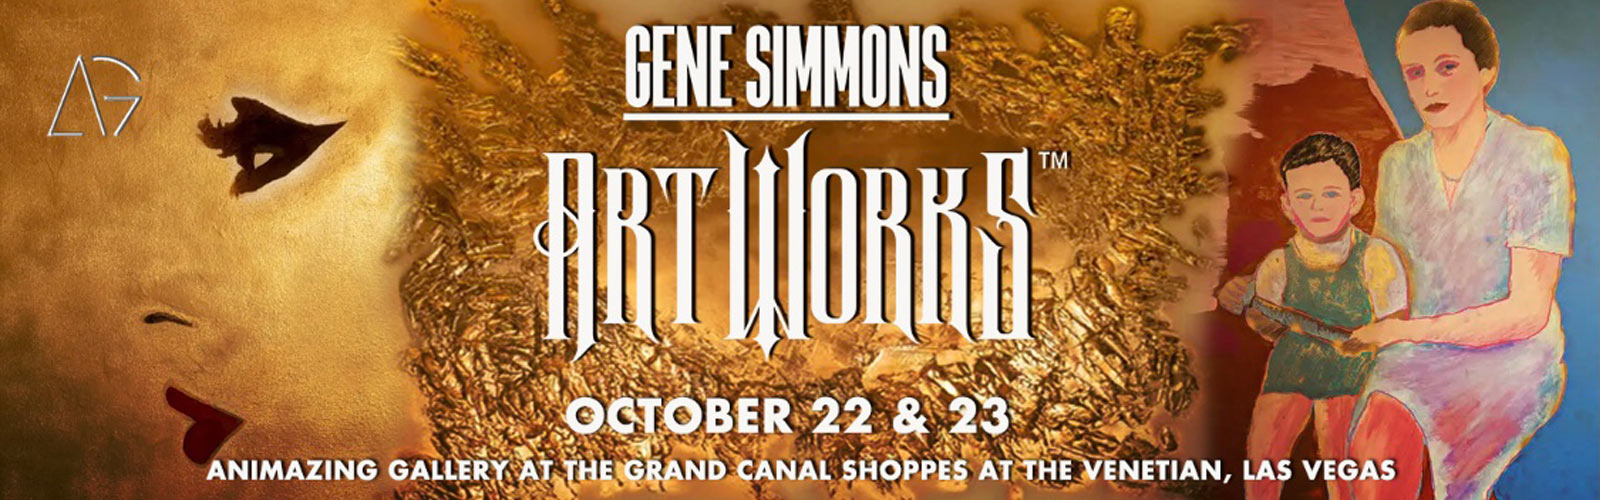 Gene Simmons Art Works, October 22 & 23rd, 2021 at the Grand Canal Shops at the Venetian, Las Vegas